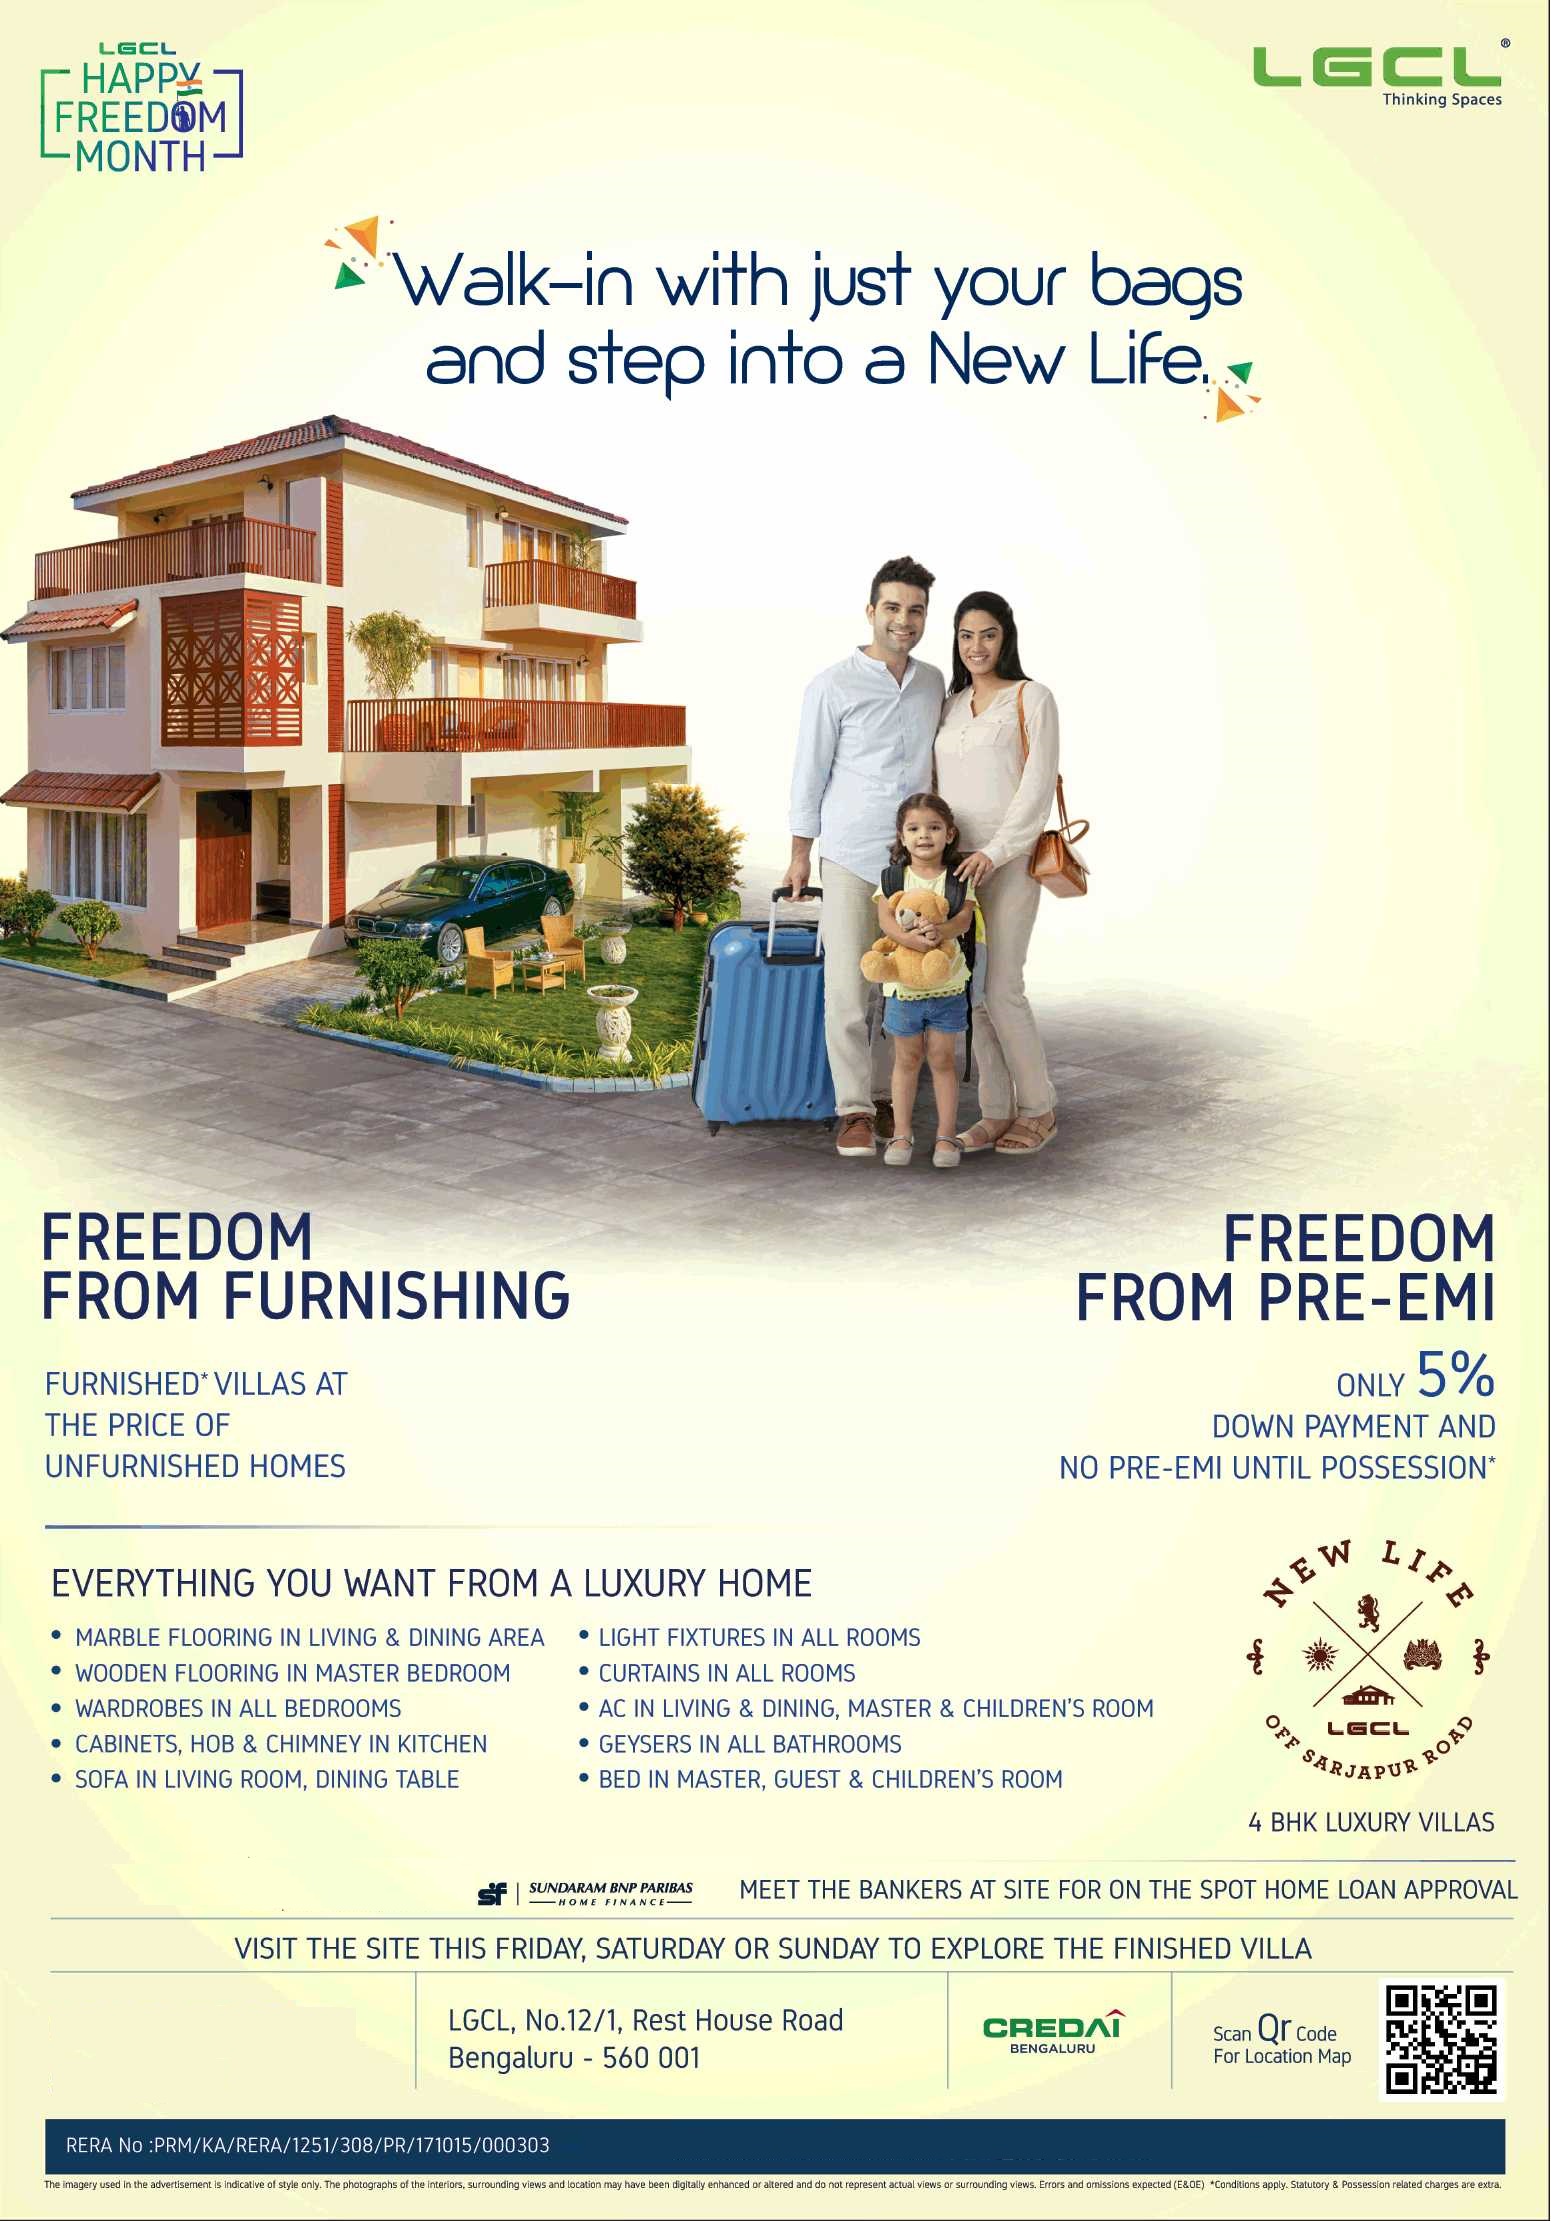 Pay only 5% down payment & no pre EMI till possession at LGCL Newlife in Bangalore Update